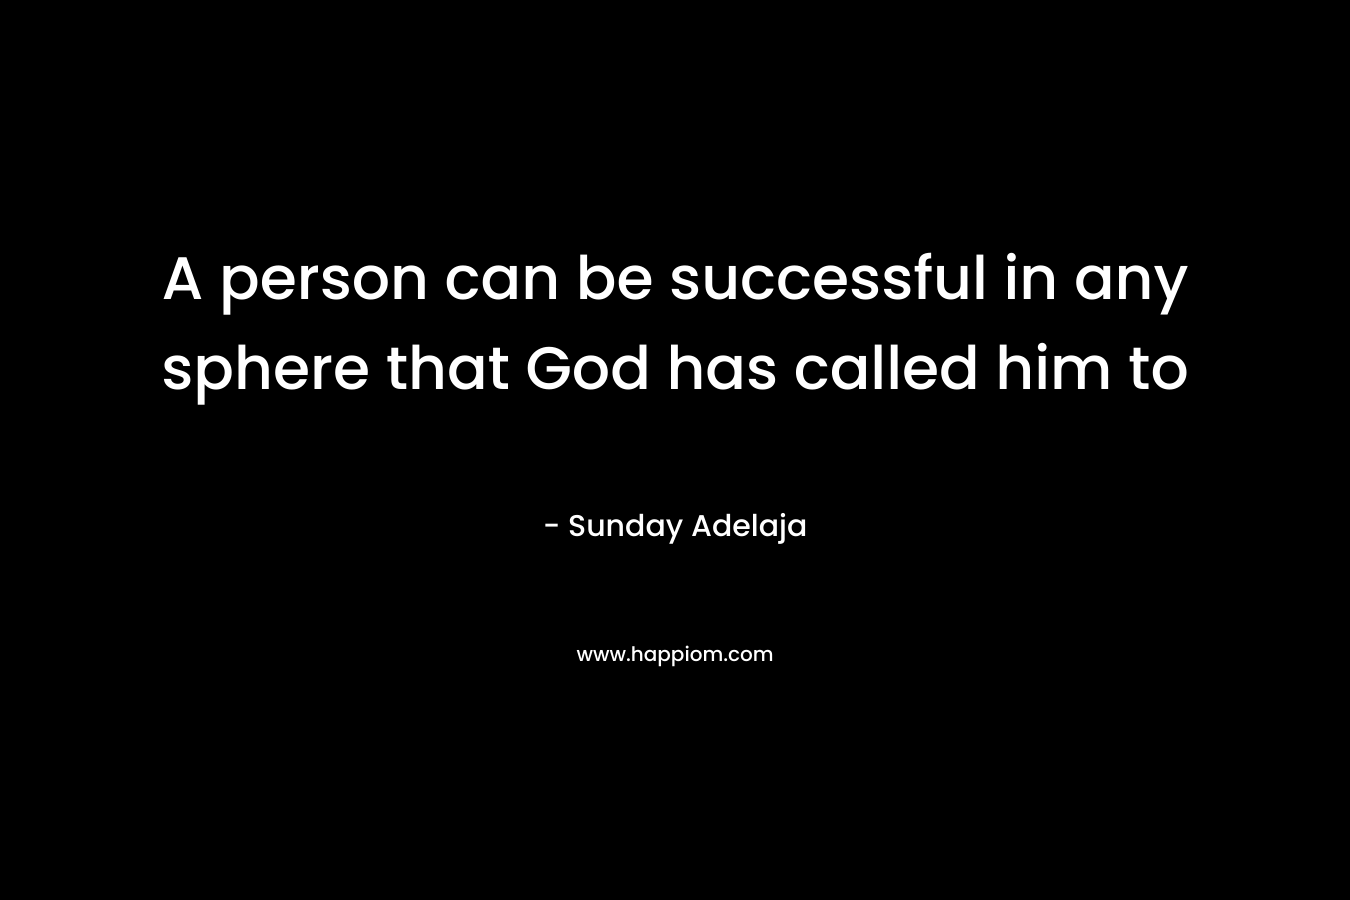 A person can be successful in any sphere that God has called him to